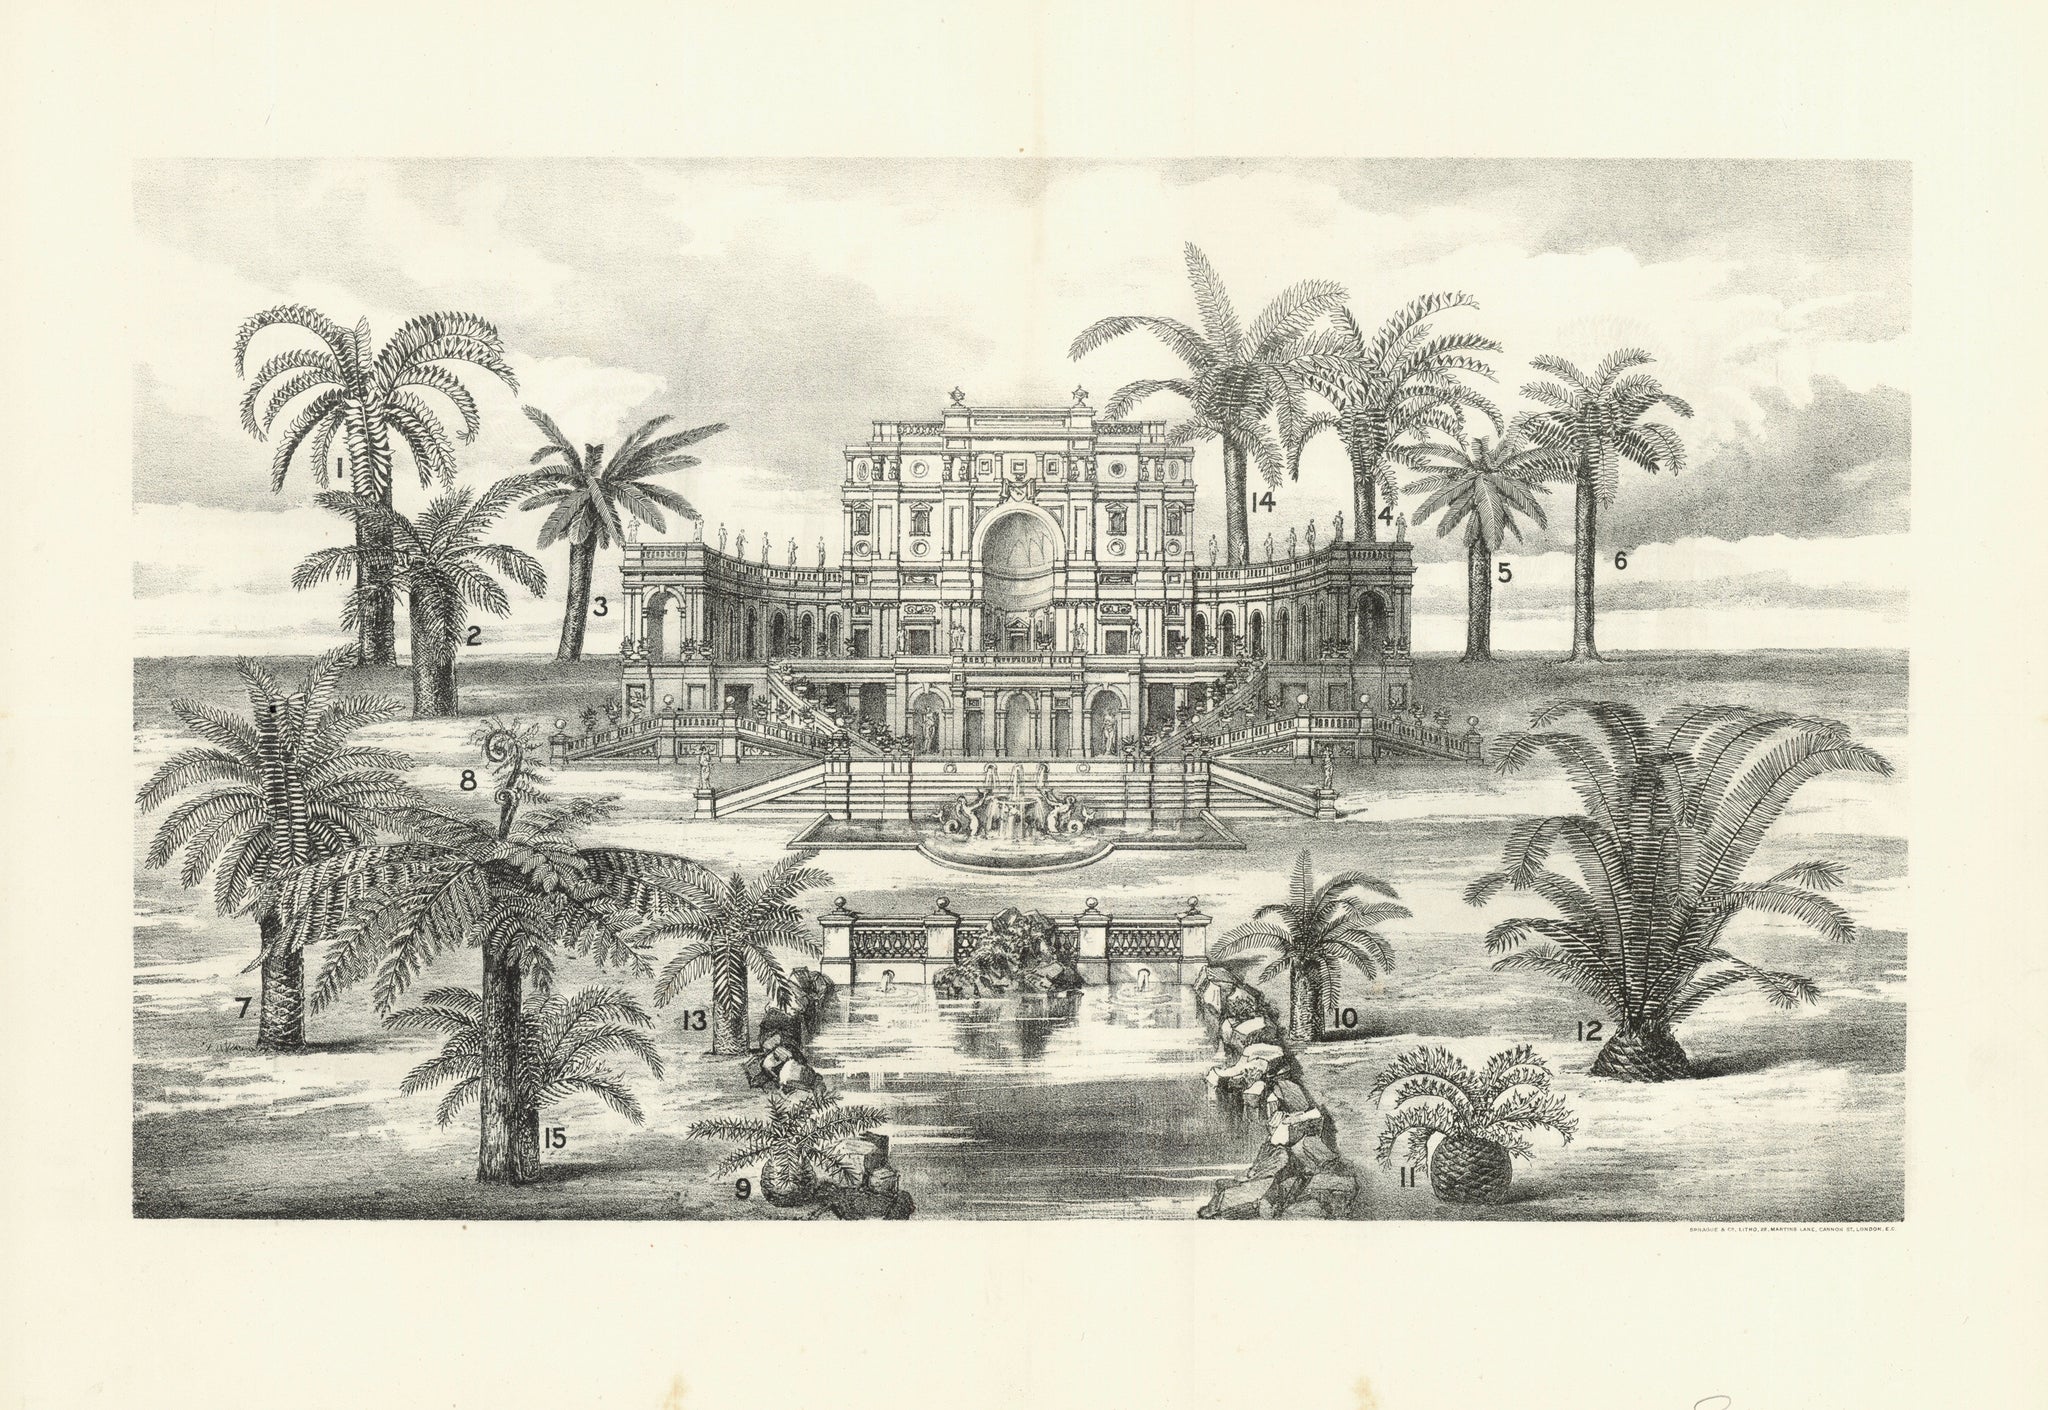 No title.  Different palm trees arranged parklike around a fictitious chateau.  The individual palm trees are numbered. On Reverse side of print are the descriptions in the French language.  Anonymous lithograph. Printed by Sprague in London  Commissioned by Roth, Mills & Co. Expoerters of Bulbs &c. Uitenhage, via Port Elizabeth, South Africa.